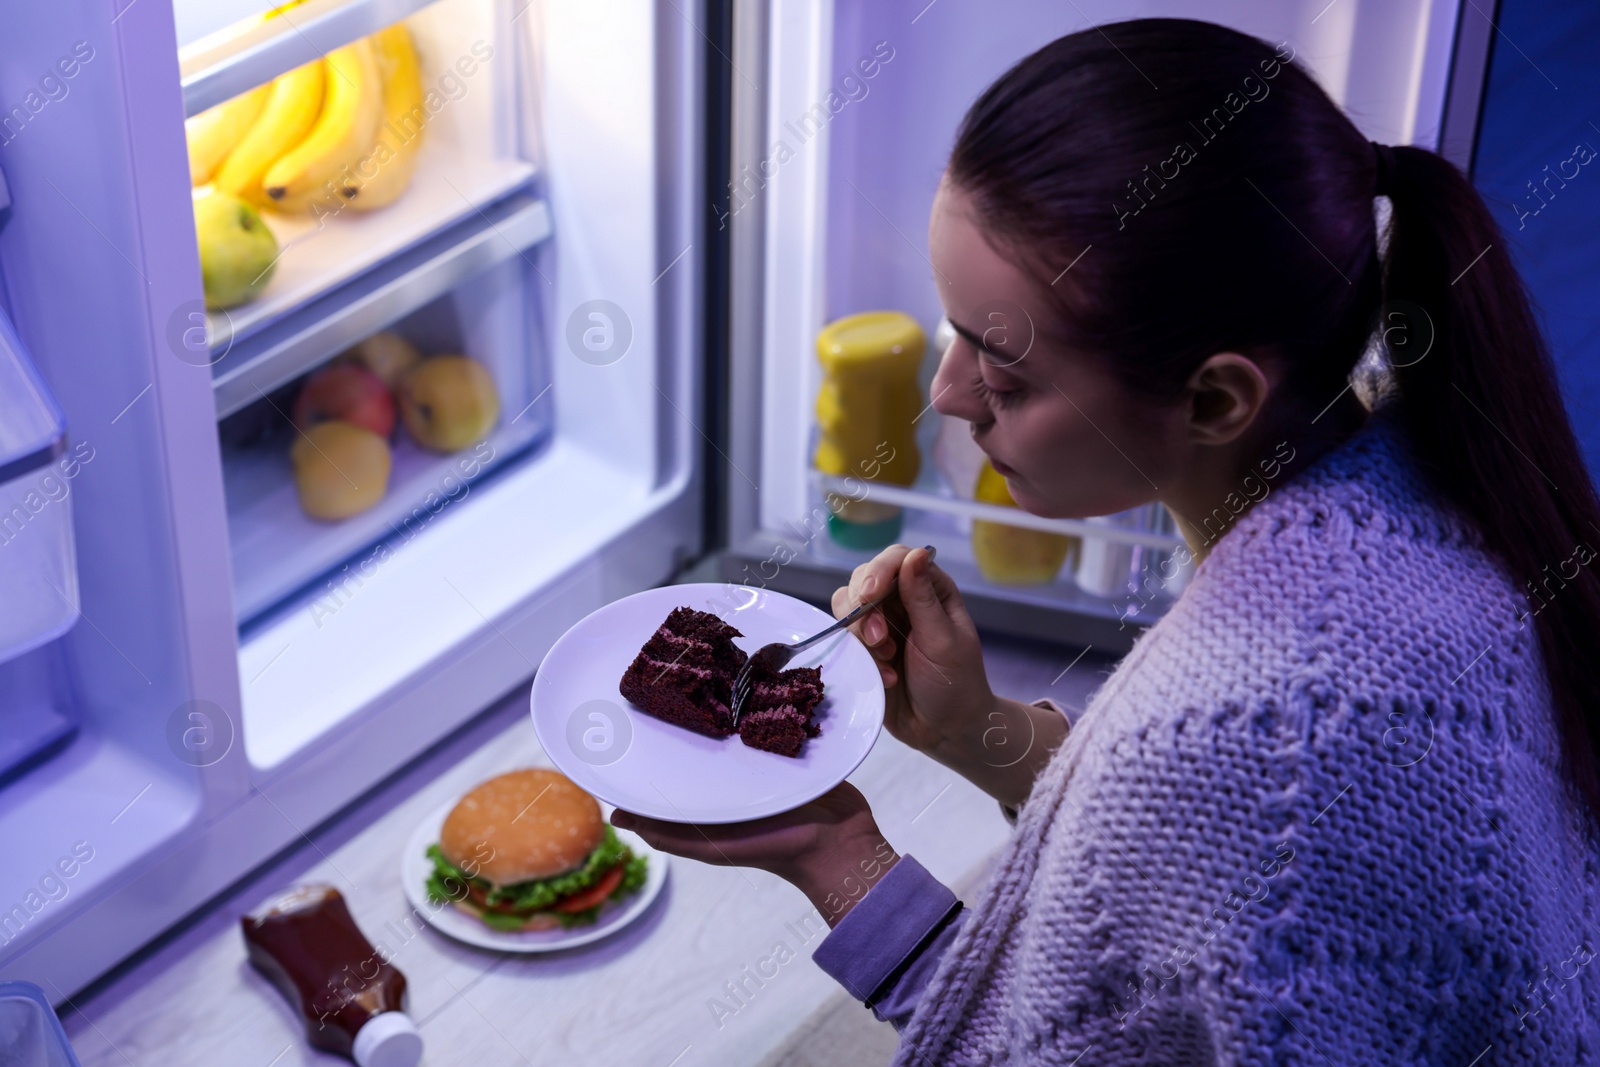 Photo of Young woman eating cake near refrigerator in kitchen at night. Bad habit